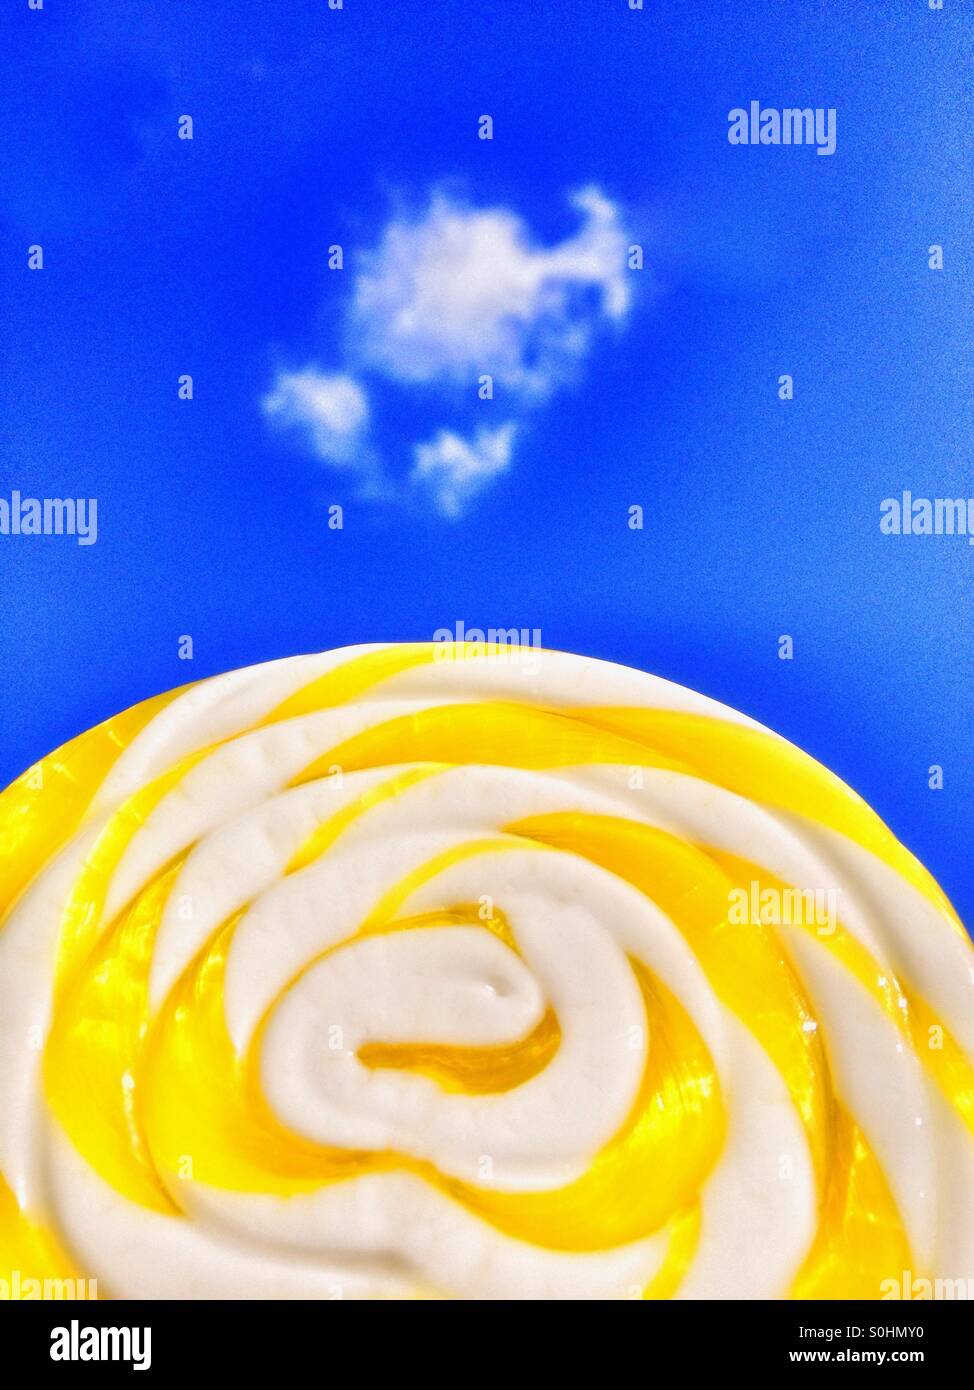 Yellow and white candy lolly against a blue sky with fluffy white cloud Stock Photo